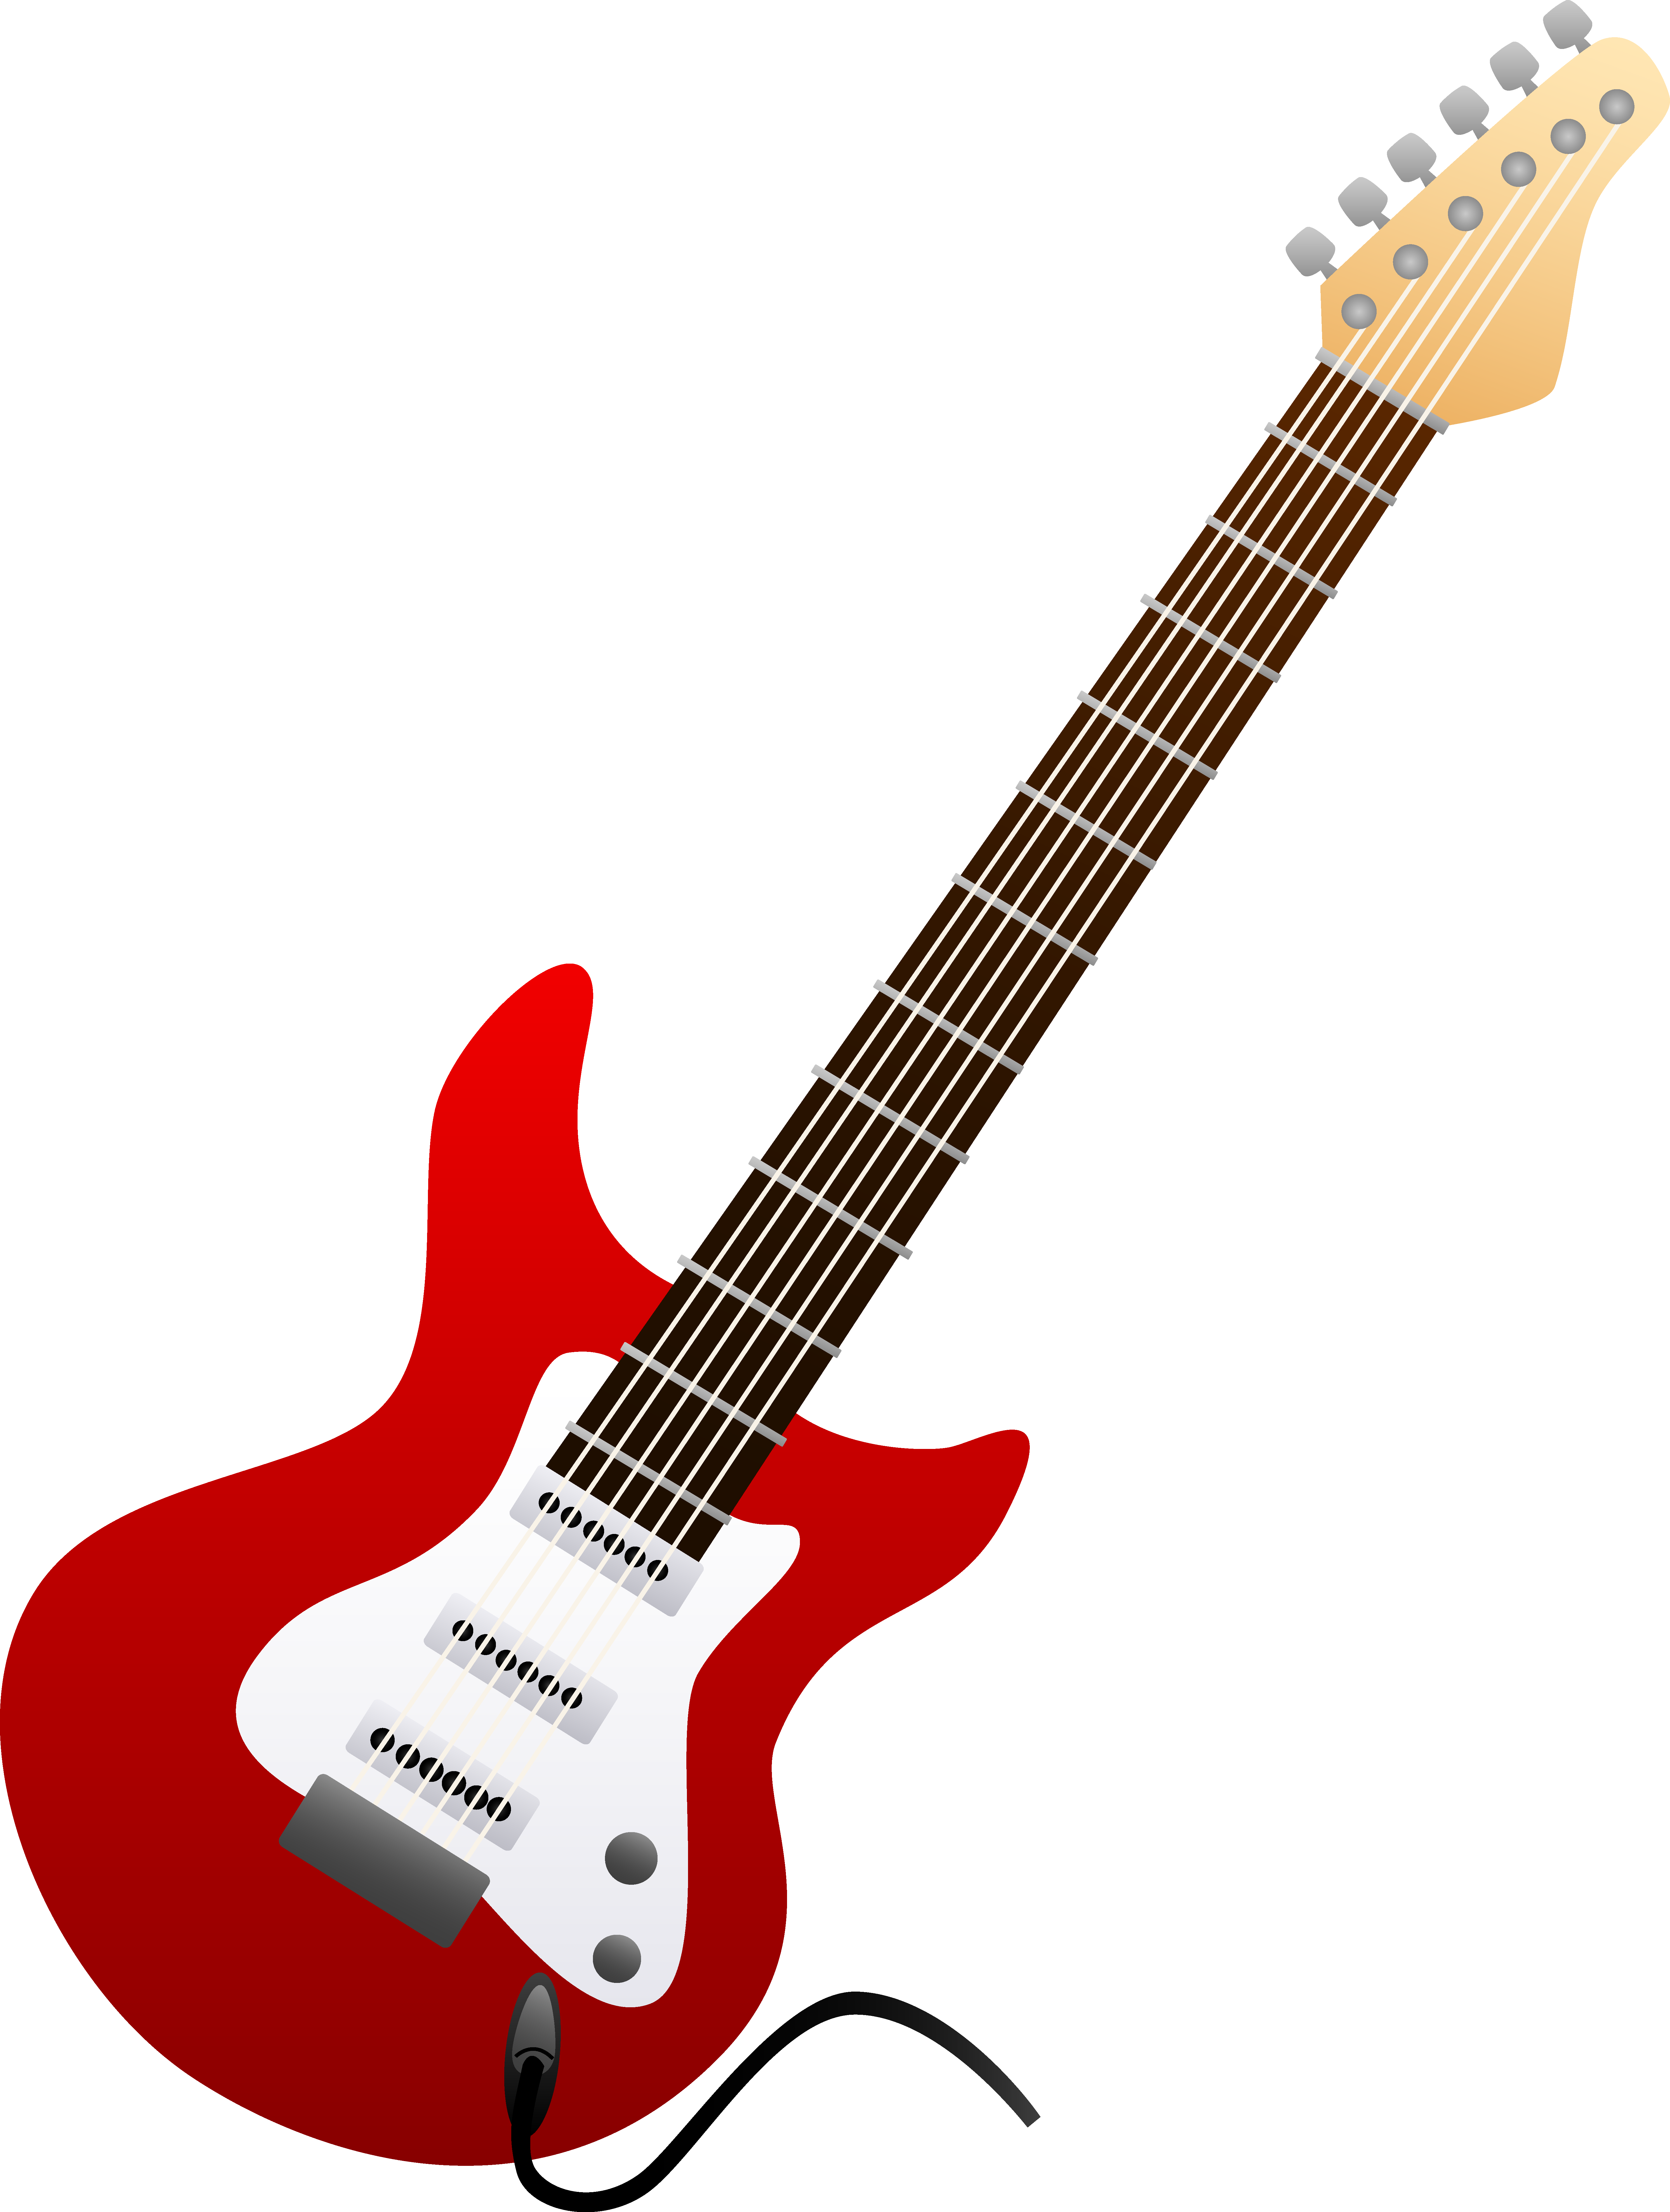 guitar outline clipart black and white